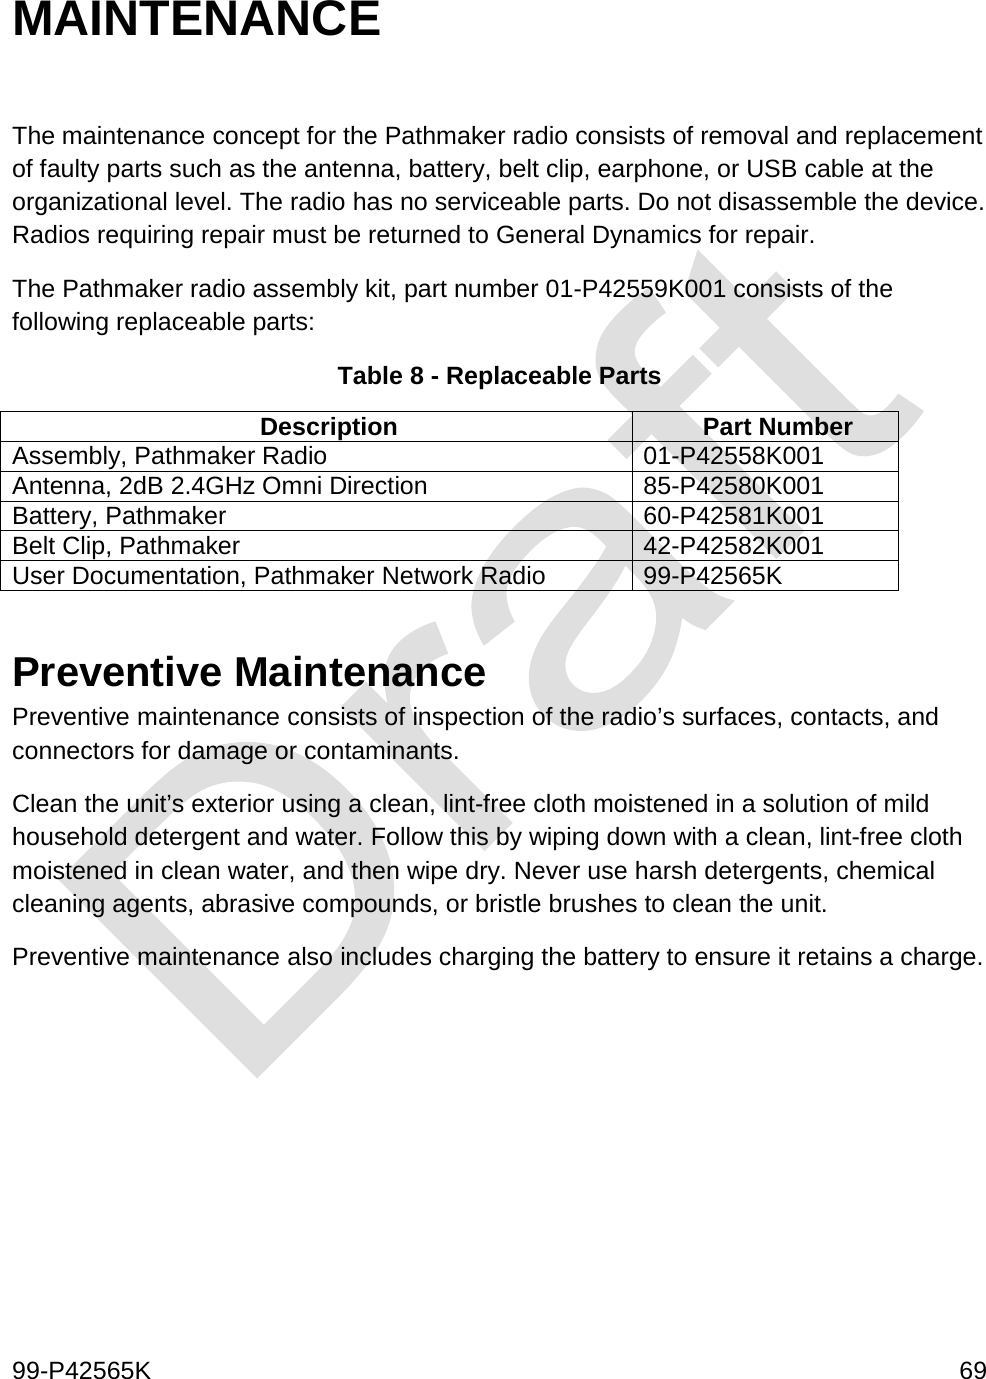  99-P42565K     69  MAINTENANCE  The maintenance concept for the Pathmaker radio consists of removal and replacement of faulty parts such as the antenna, battery, belt clip, earphone, or USB cable at the organizational level. The radio has no serviceable parts. Do not disassemble the device. Radios requiring repair must be returned to General Dynamics for repair.  The Pathmaker radio assembly kit, part number 01-P42559K001 consists of the following replaceable parts: Table 8 - Replaceable Parts Description Part Number Assembly, Pathmaker Radio 01-P42558K001 Antenna, 2dB 2.4GHz Omni Direction 85-P42580K001 Battery, Pathmaker 60-P42581K001 Belt Clip, Pathmaker 42-P42582K001 User Documentation, Pathmaker Network Radio 99-P42565K  Preventive Maintenance Preventive maintenance consists of inspection of the radio’s surfaces, contacts, and connectors for damage or contaminants.  Clean the unit’s exterior using a clean, lint-free cloth moistened in a solution of mild household detergent and water. Follow this by wiping down with a clean, lint-free cloth moistened in clean water, and then wipe dry. Never use harsh detergents, chemical cleaning agents, abrasive compounds, or bristle brushes to clean the unit.  Preventive maintenance also includes charging the battery to ensure it retains a charge.     